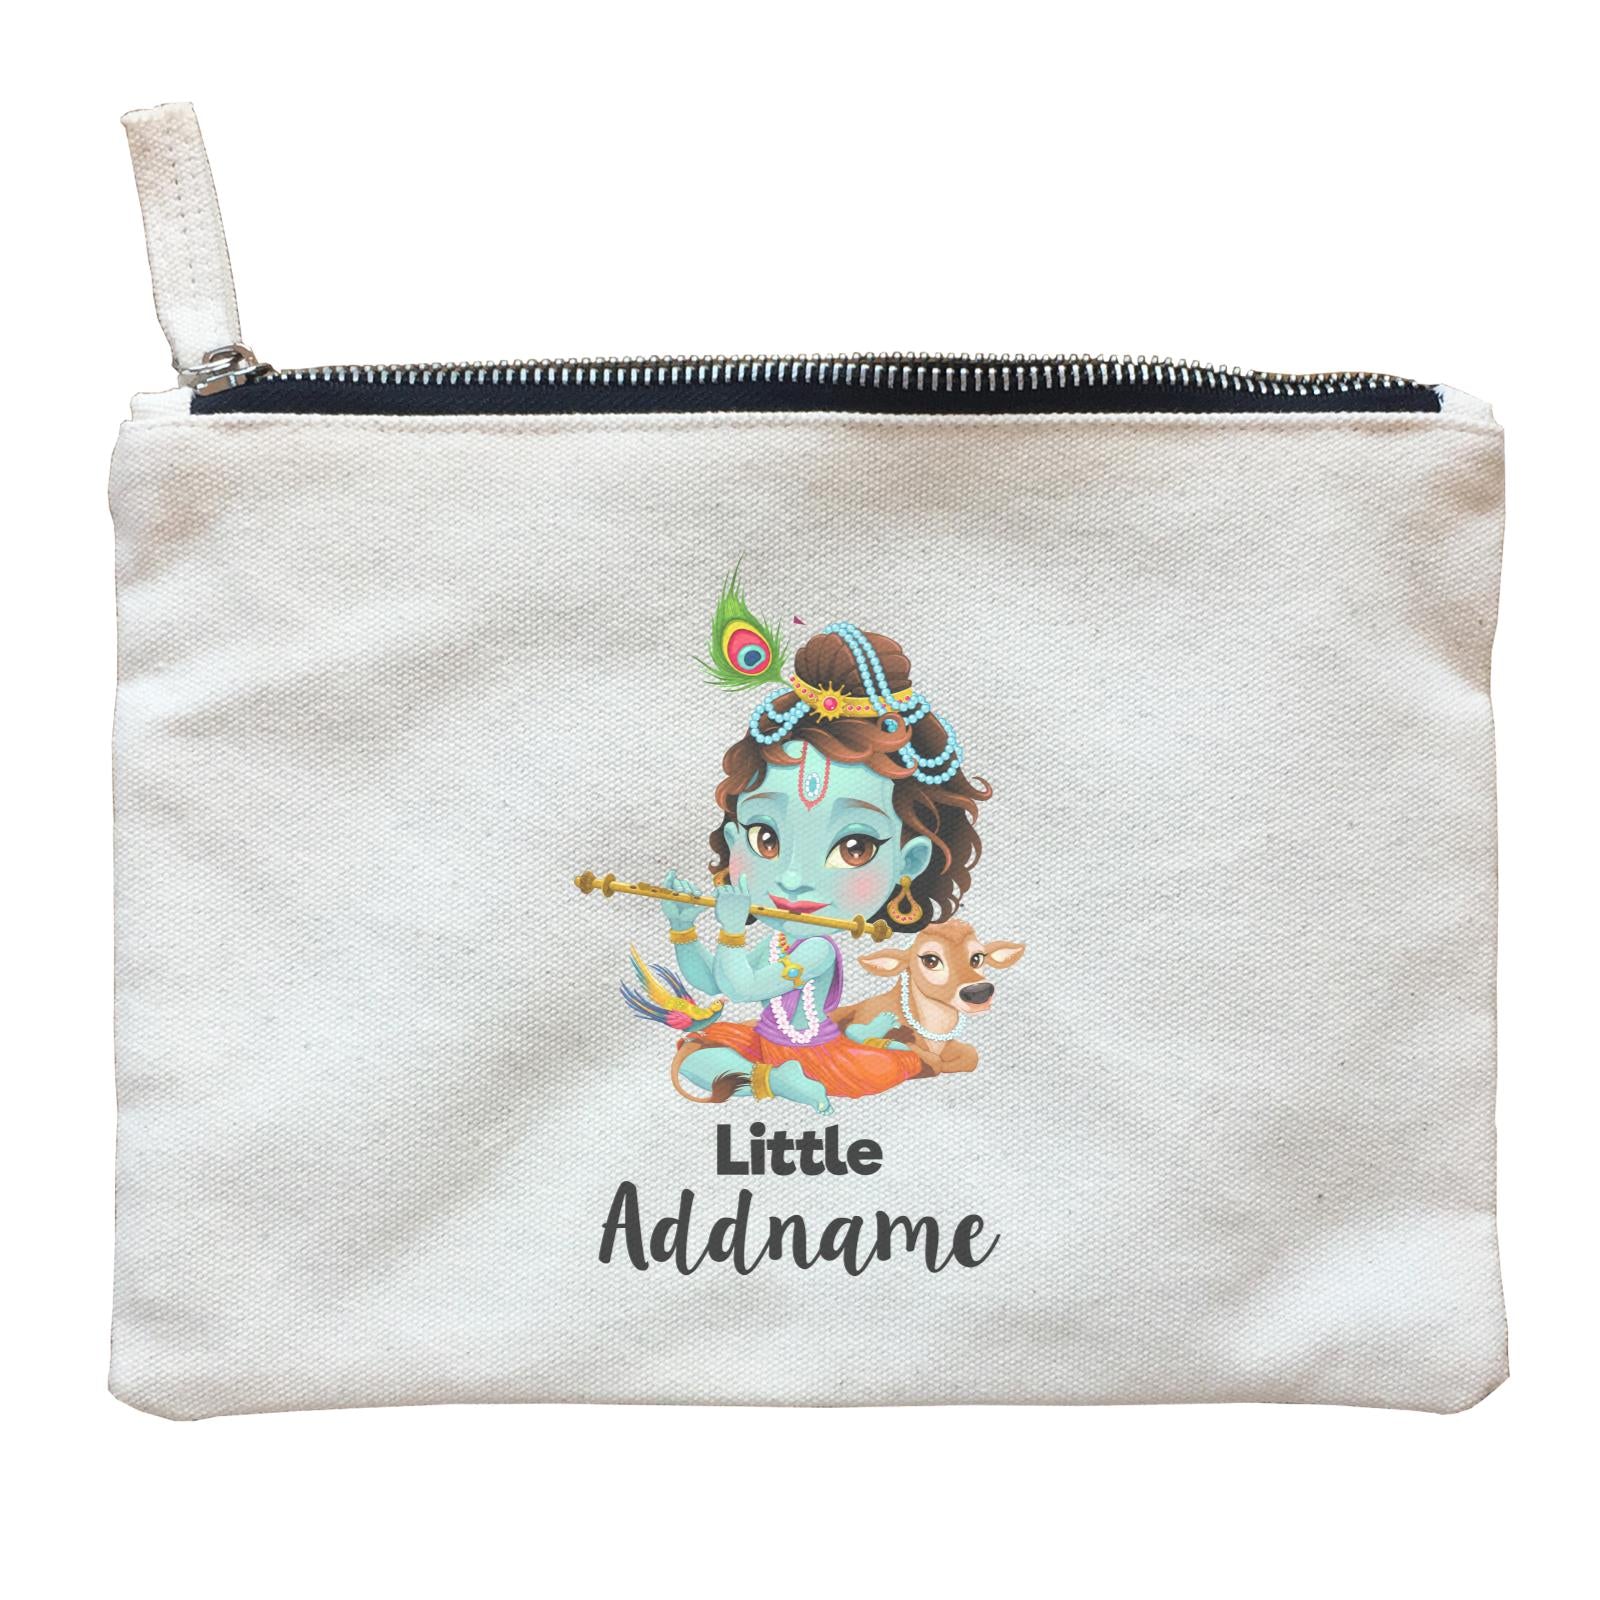 Artistic Krishna Playing Flute with Cow Little Addname Zipper Pouch